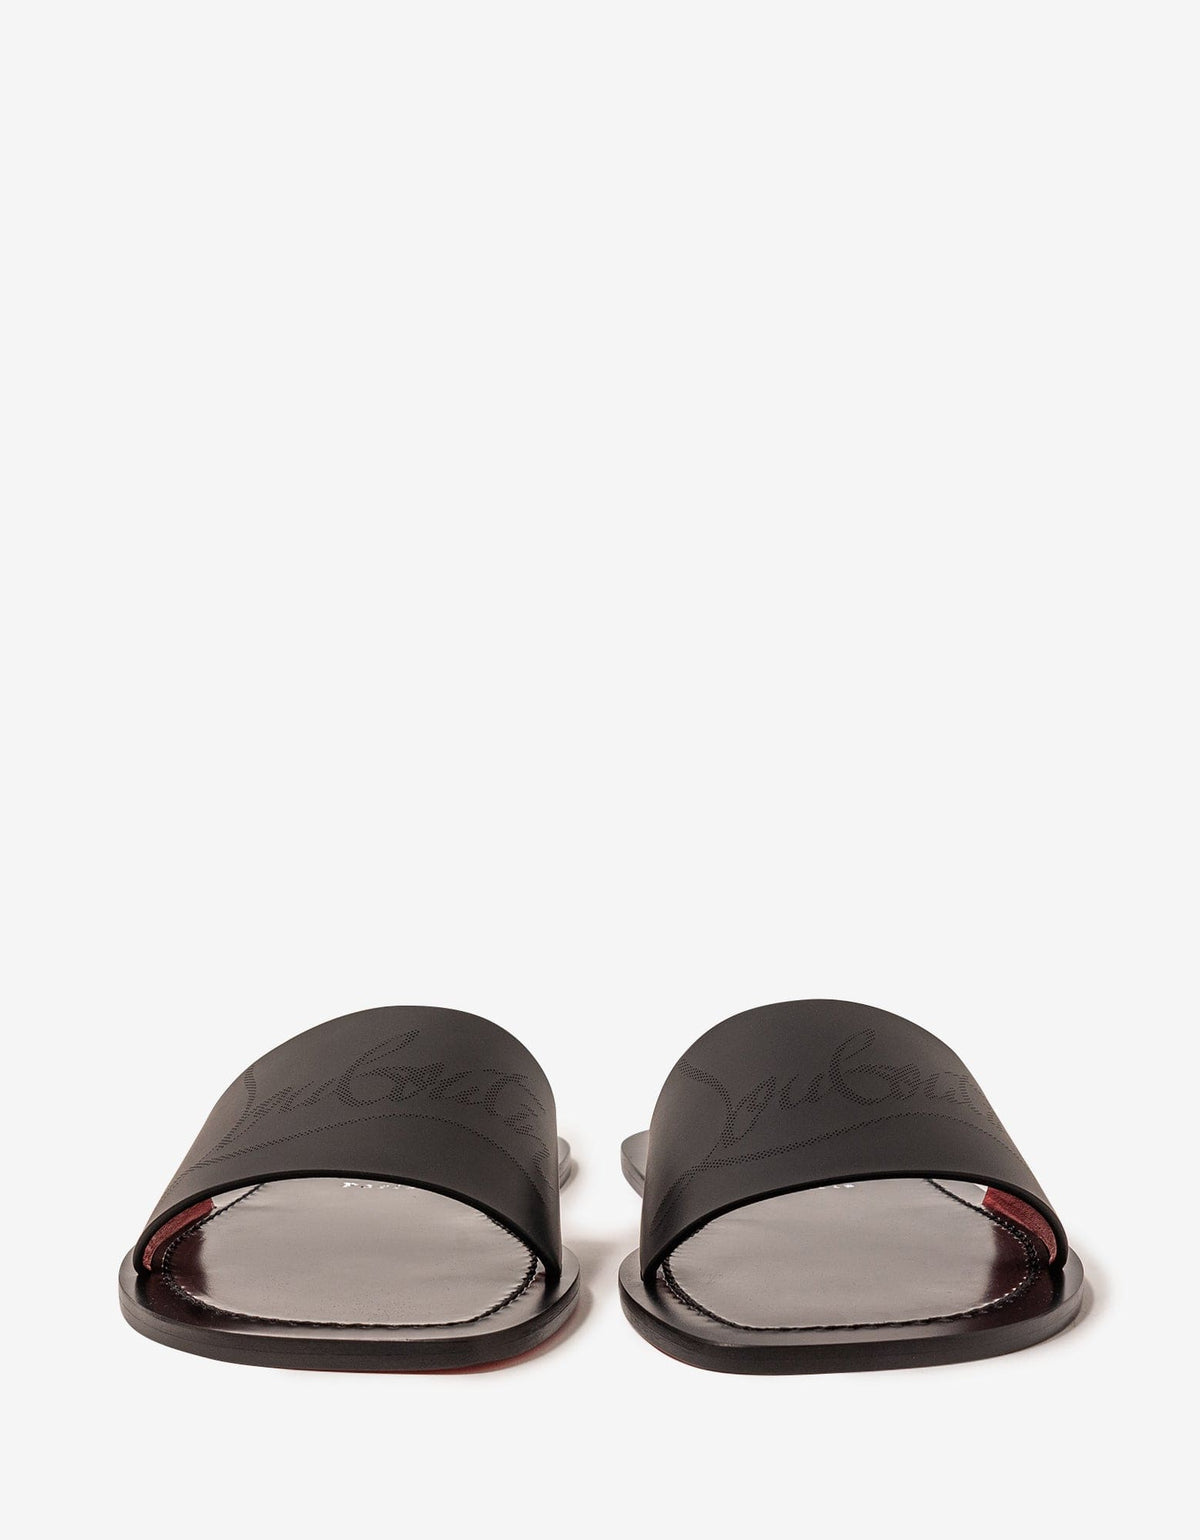 Christian Louboutin Coolraoul Black Leather Slide Sandals -